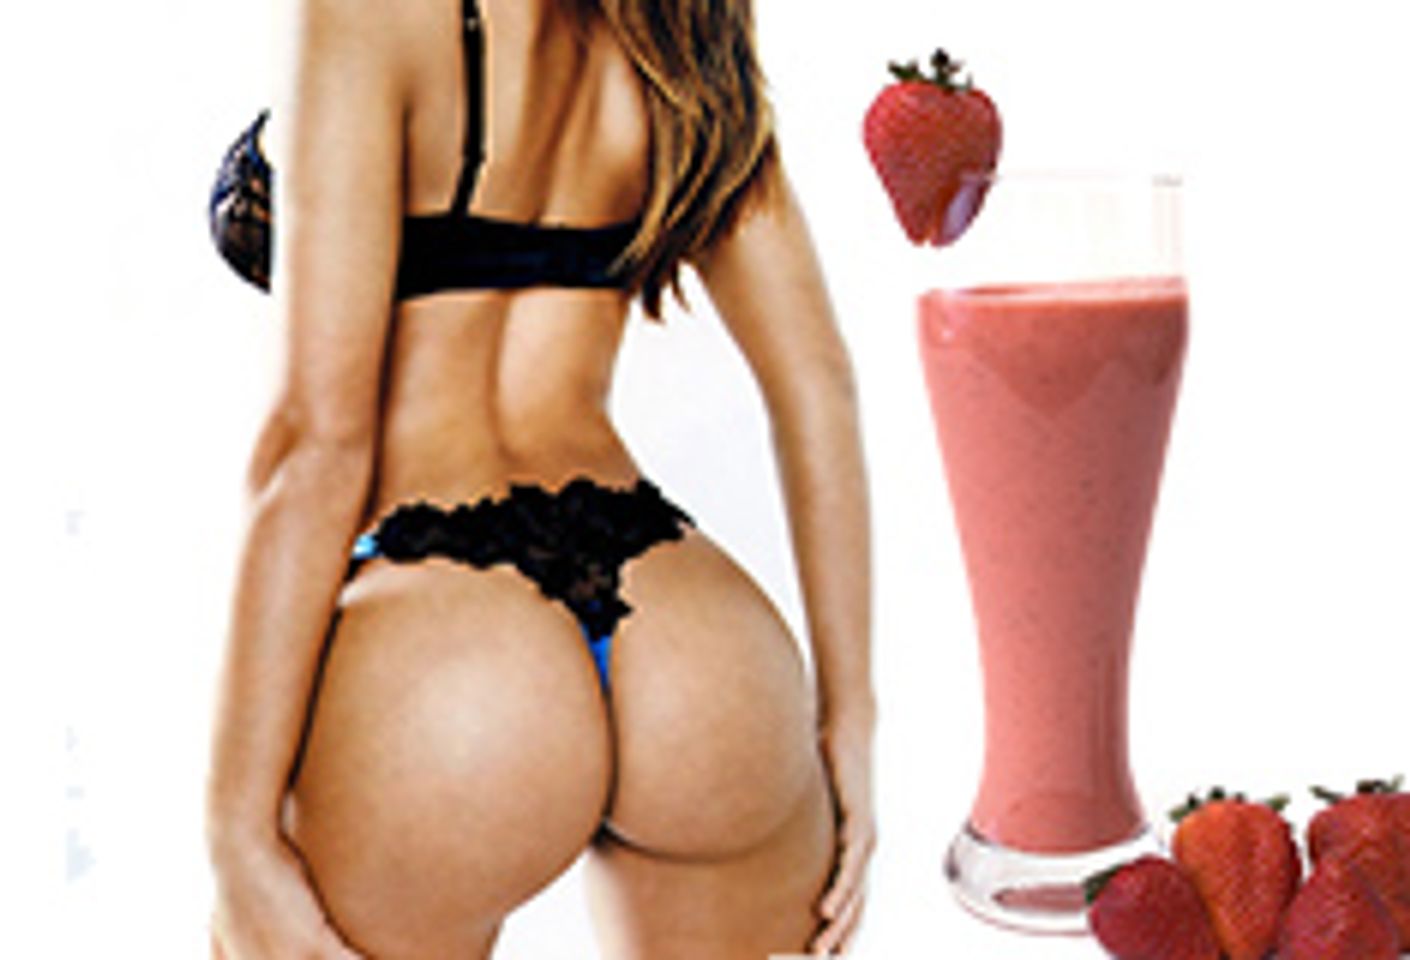 Yappo.com Launches Ass Smoothie Video Line